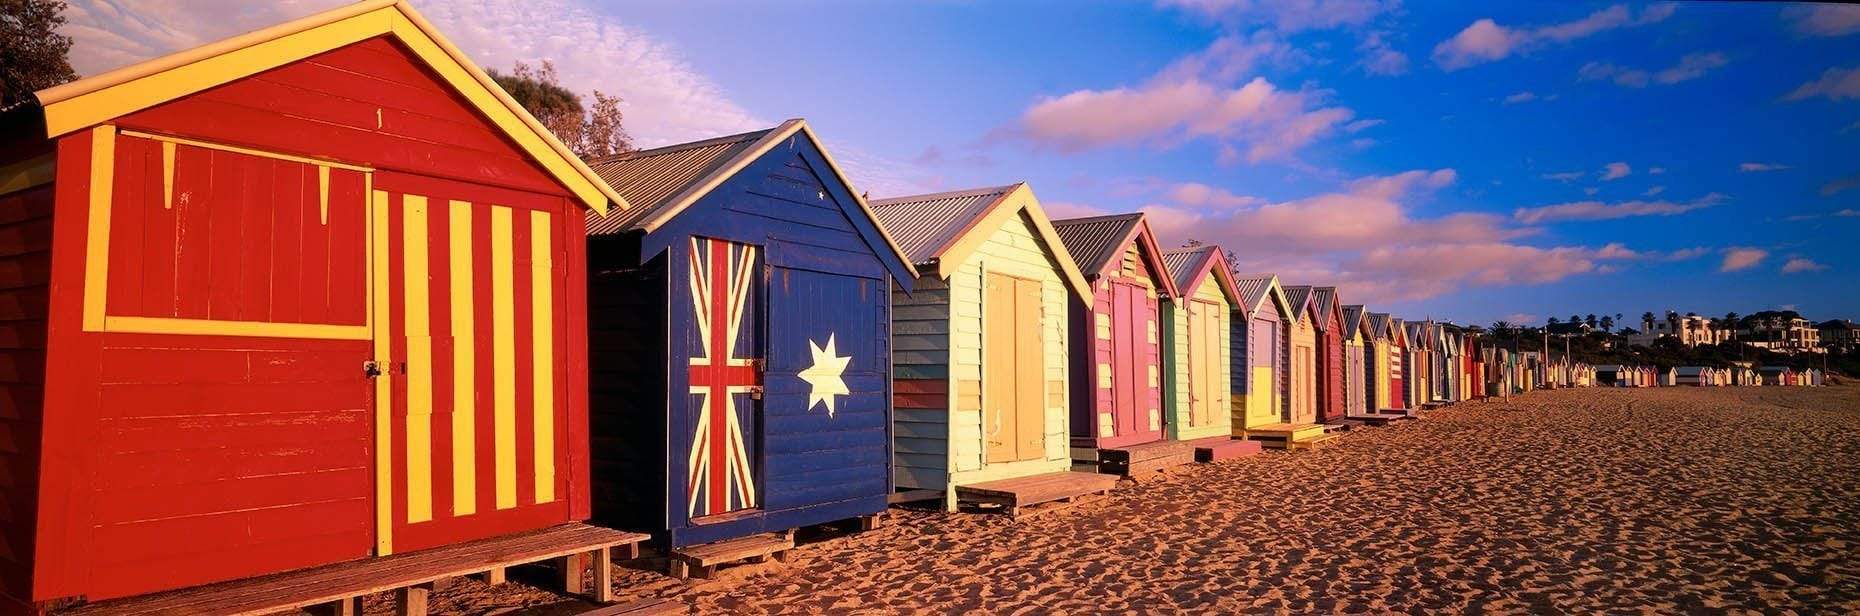 Similar shapes but different colors of huts with different flags painted on, True Blue - Brighton VIC 